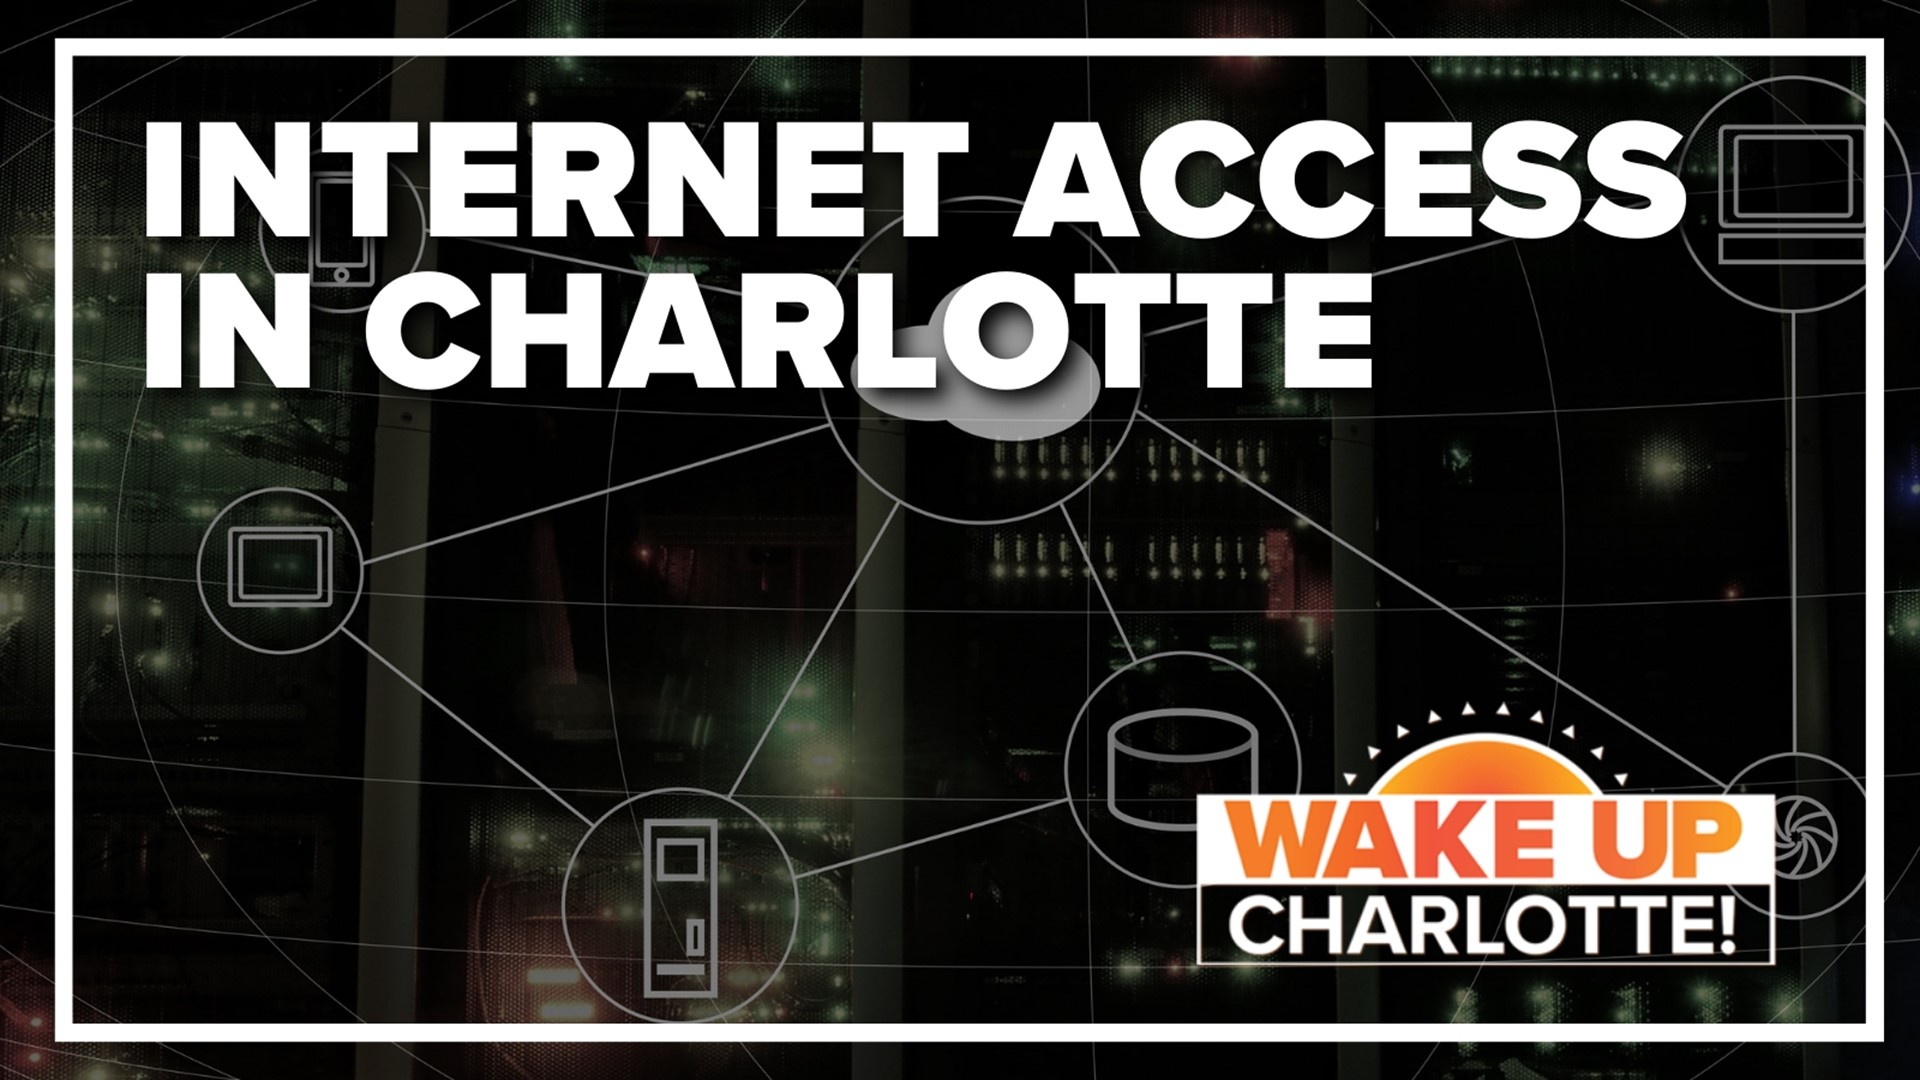 A big push to get more folks connected to the internet in the Queen City.